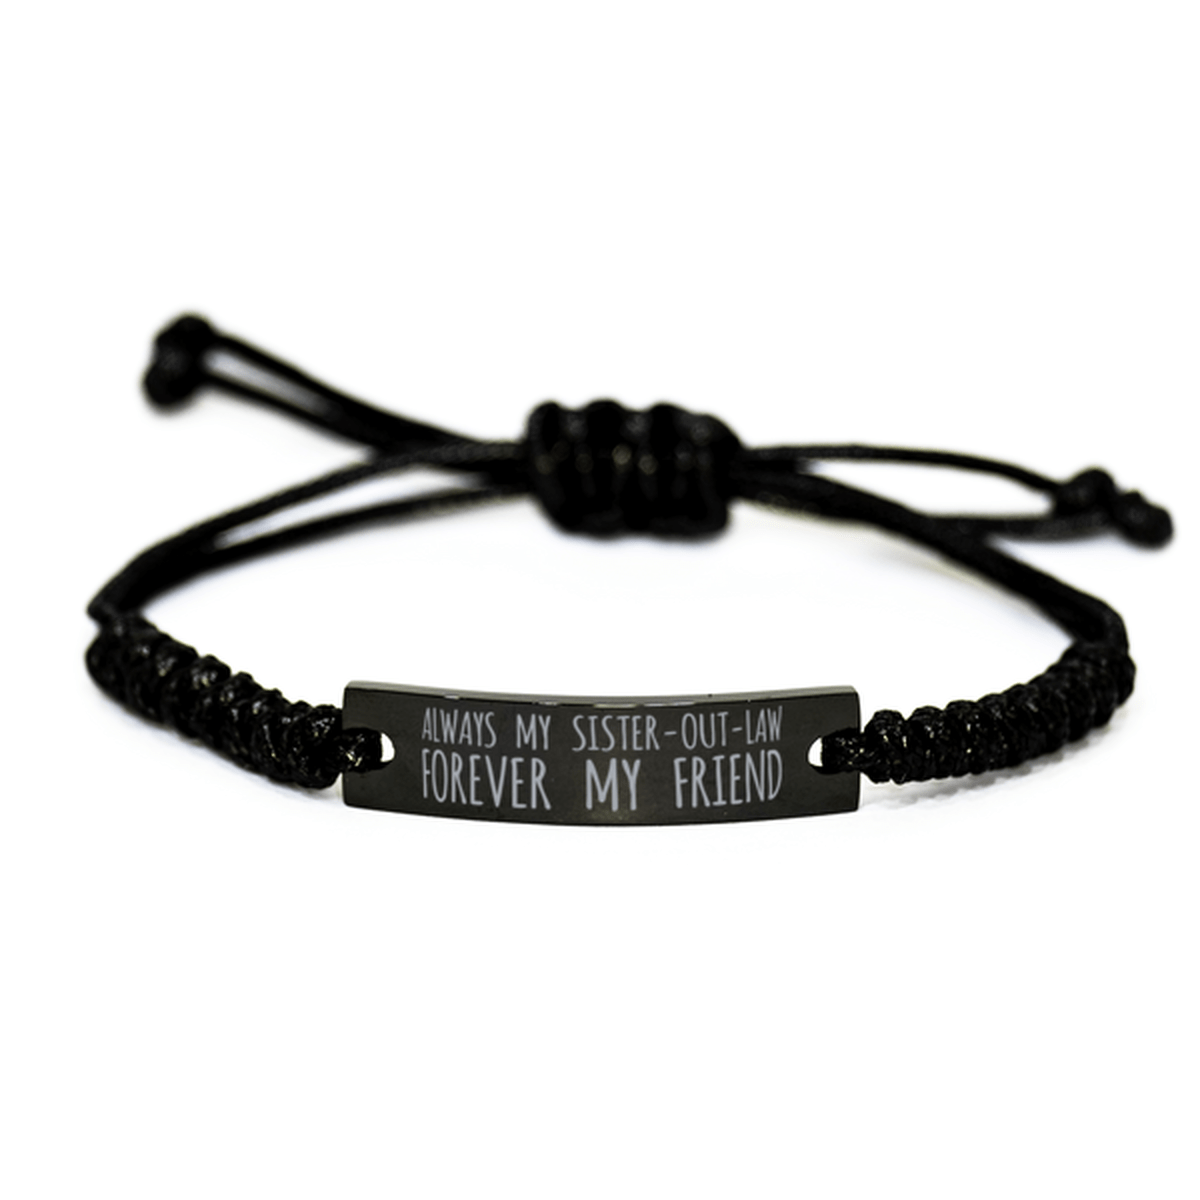 Inspirational Sister-Out-Law Black Rope Bracelet, Always My Sister-Out-Law Forever My Friend, Best Birthday Gifts For Family